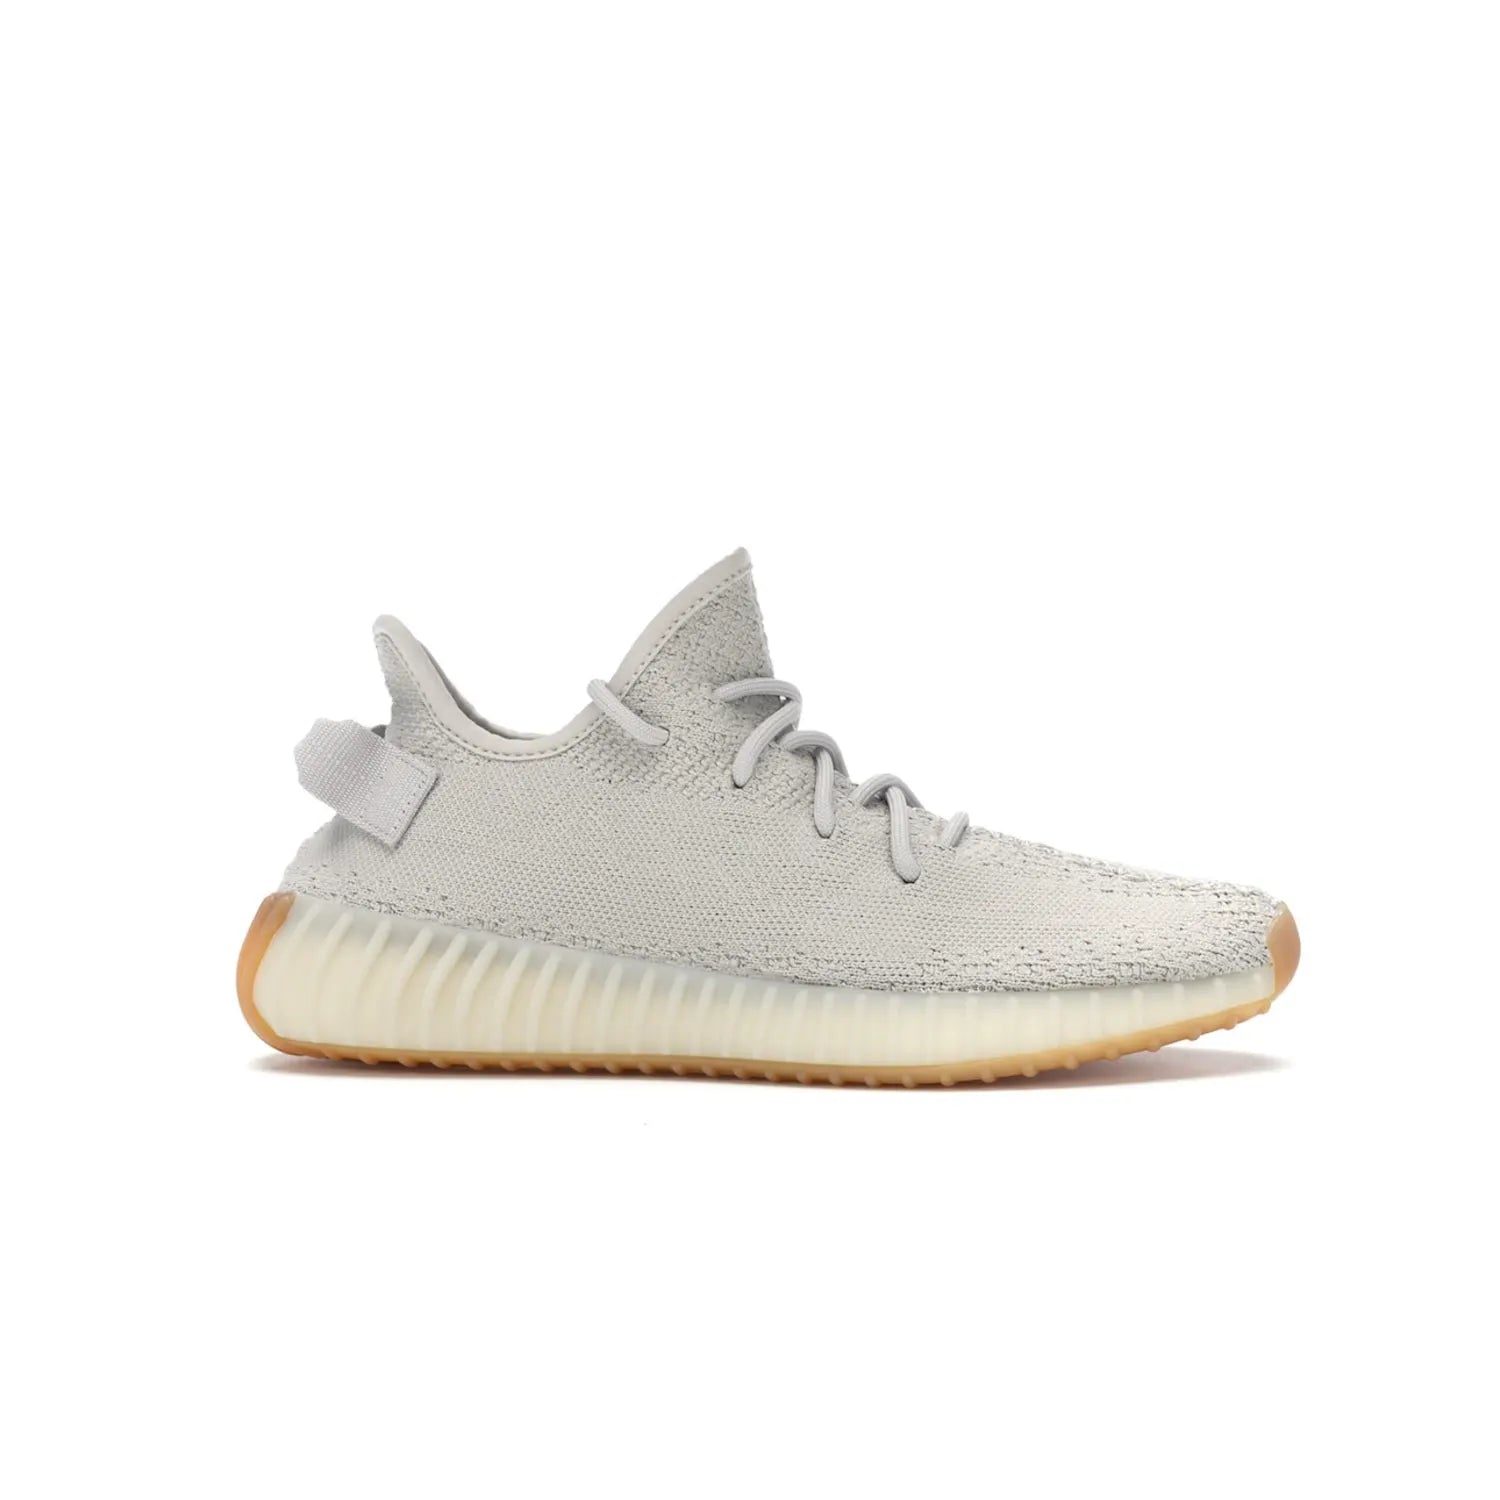 adidas Yeezy Boost 350 V2 Sesame - Image 2 - Only at www.BallersClubKickz.com - Introducing the adidas Yeezy Boost 350 V2 Sesame. Featuring a sesame upper, midsole and gum sole for a sleek silhouette. Cop the stylish sneaker released in November 2018.